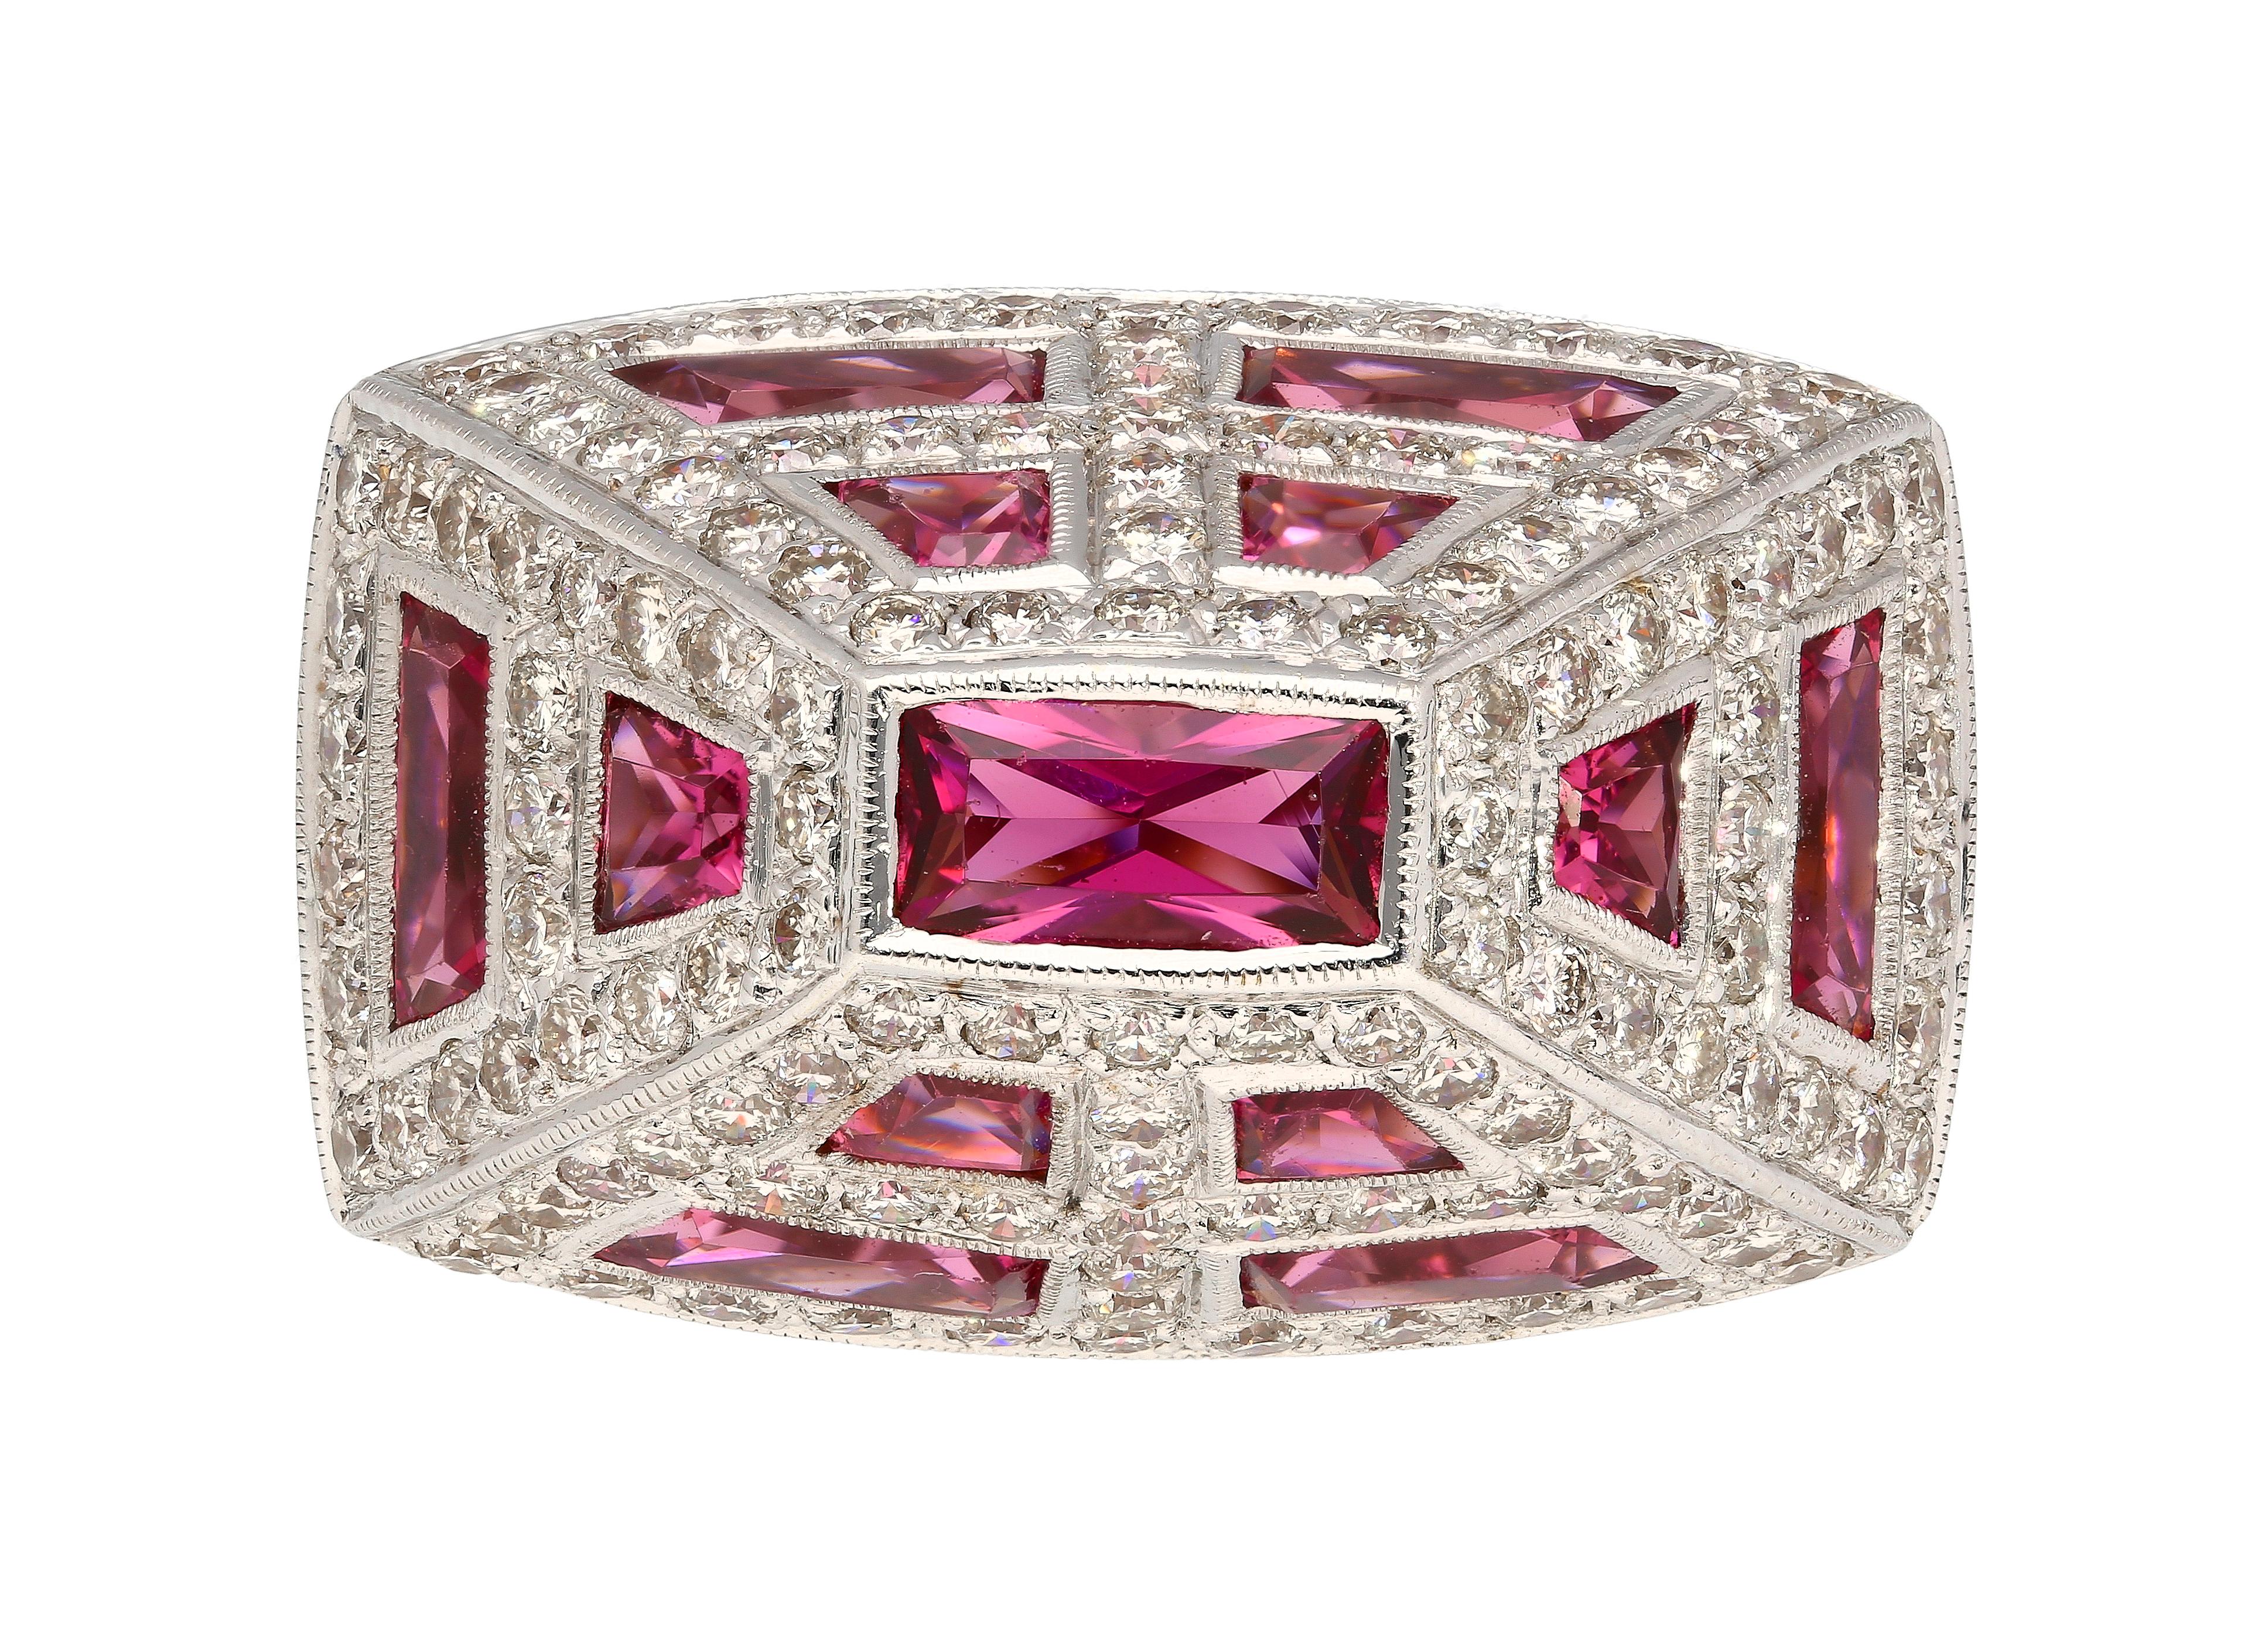 18k white gold pyramid shaped ascending men's and unisex ring. Featuring a cluster of bezel and prong set Pink Tourmalines and white diamonds. This ring has a stunning symmetrical aesthetic that offers excellent color contrast and sharpness.

Ring